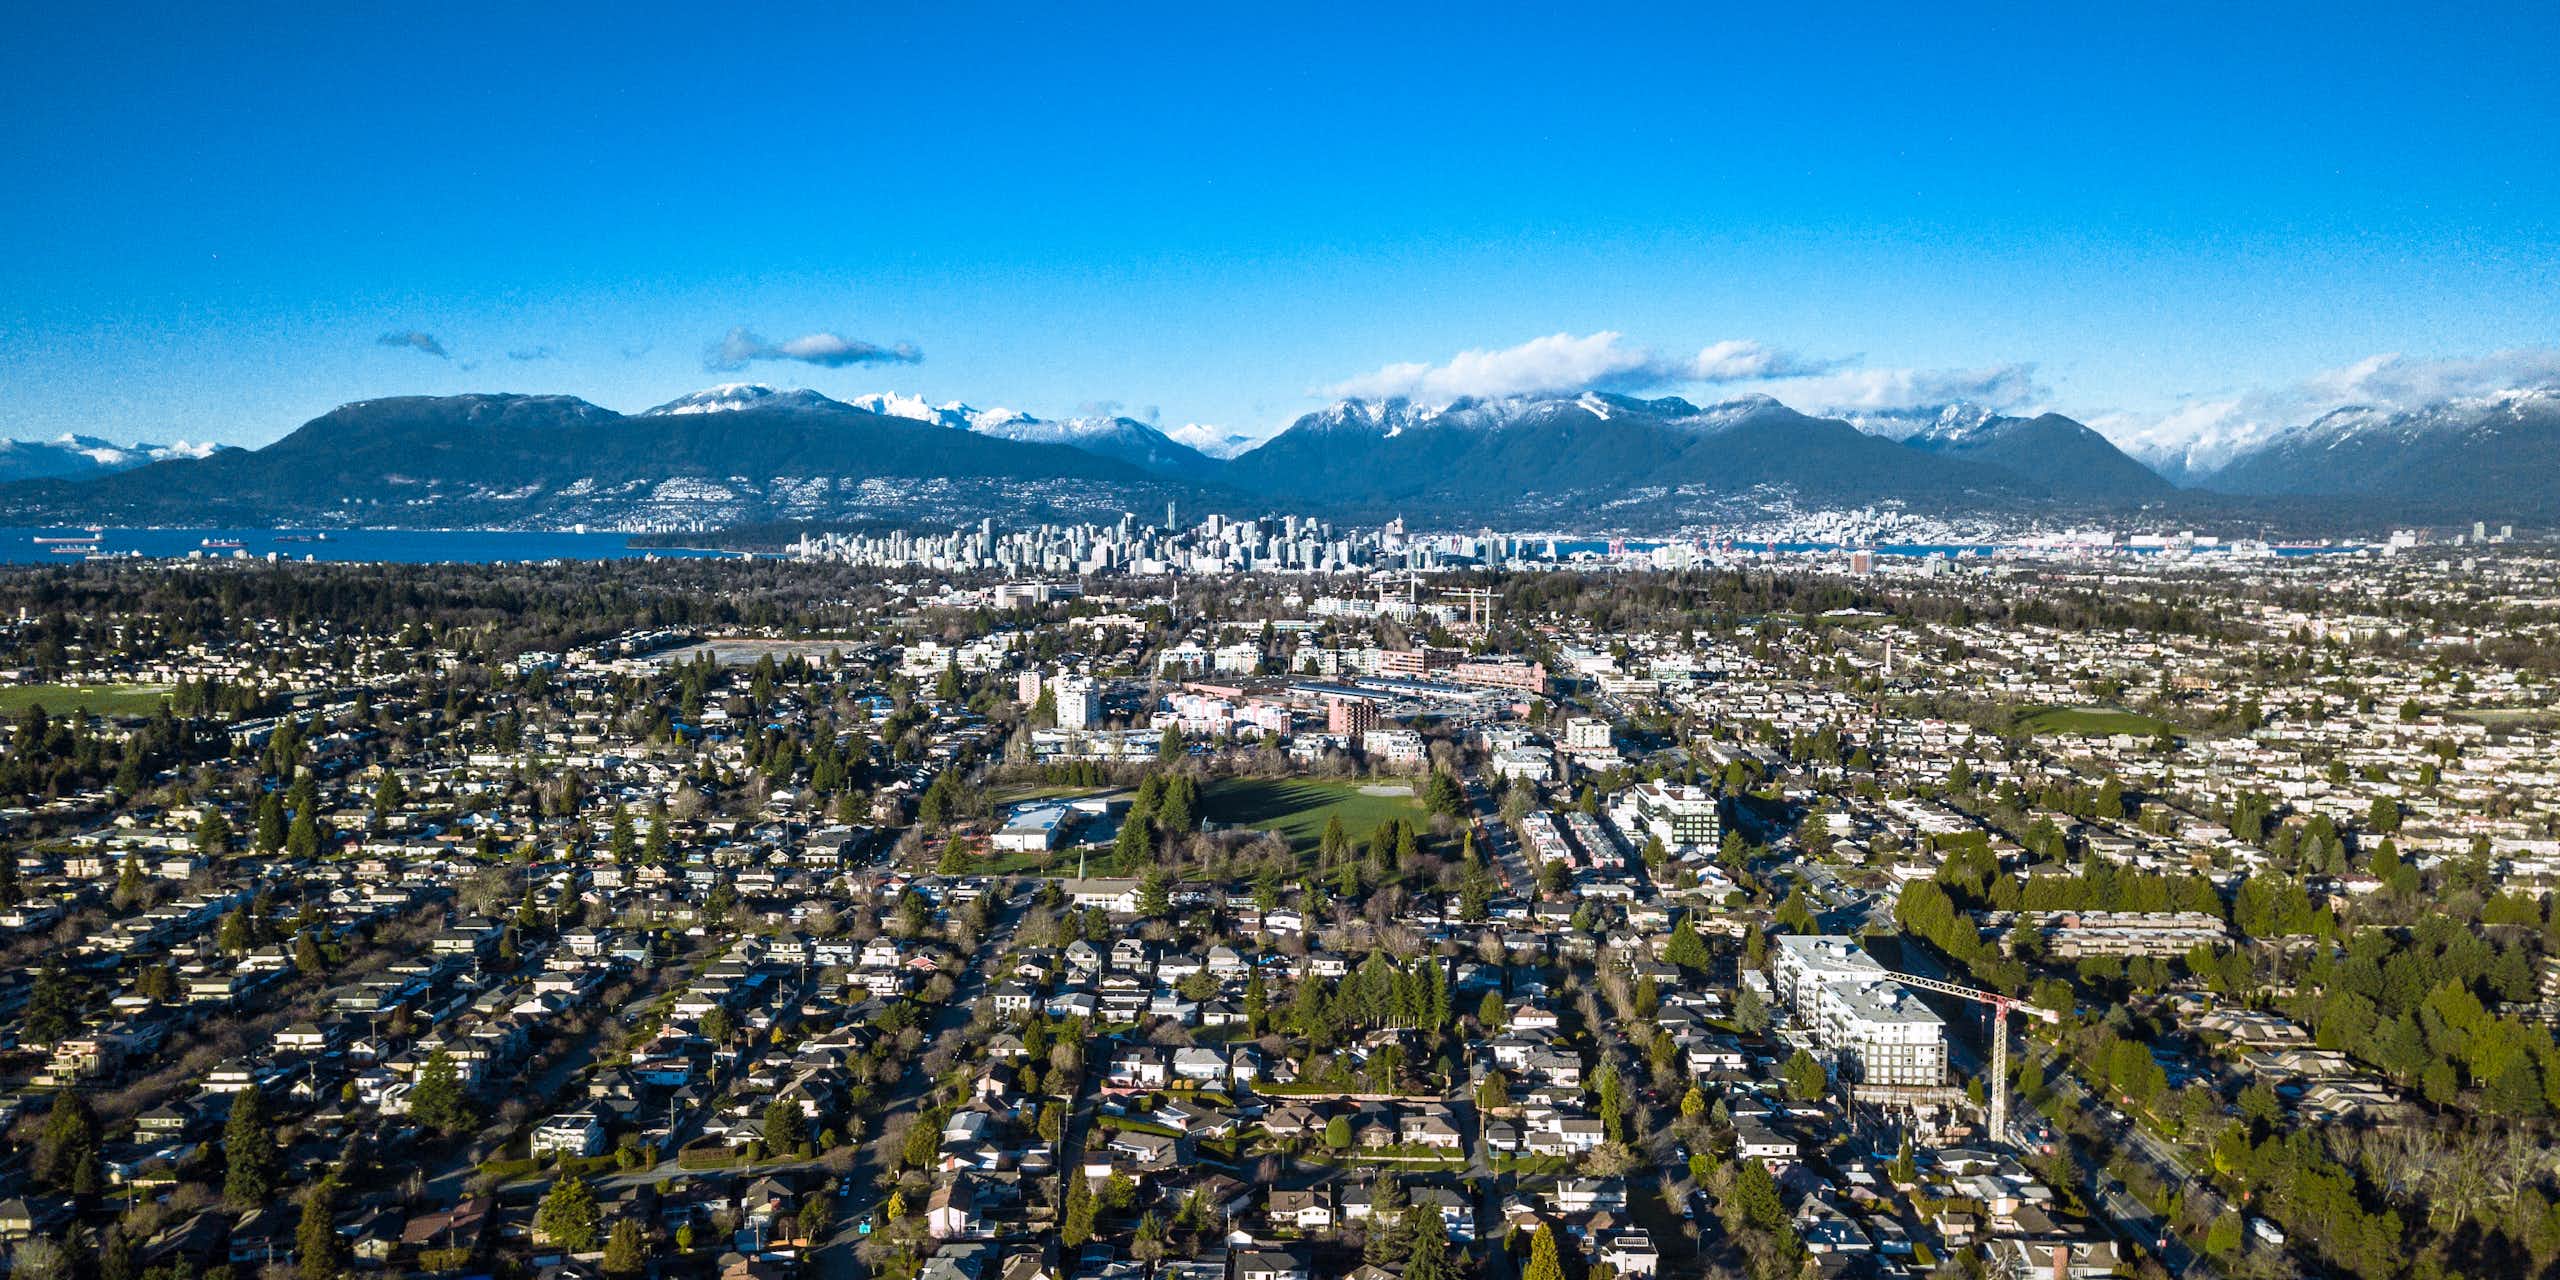 An aerial view of an urban area with mountains in the background.